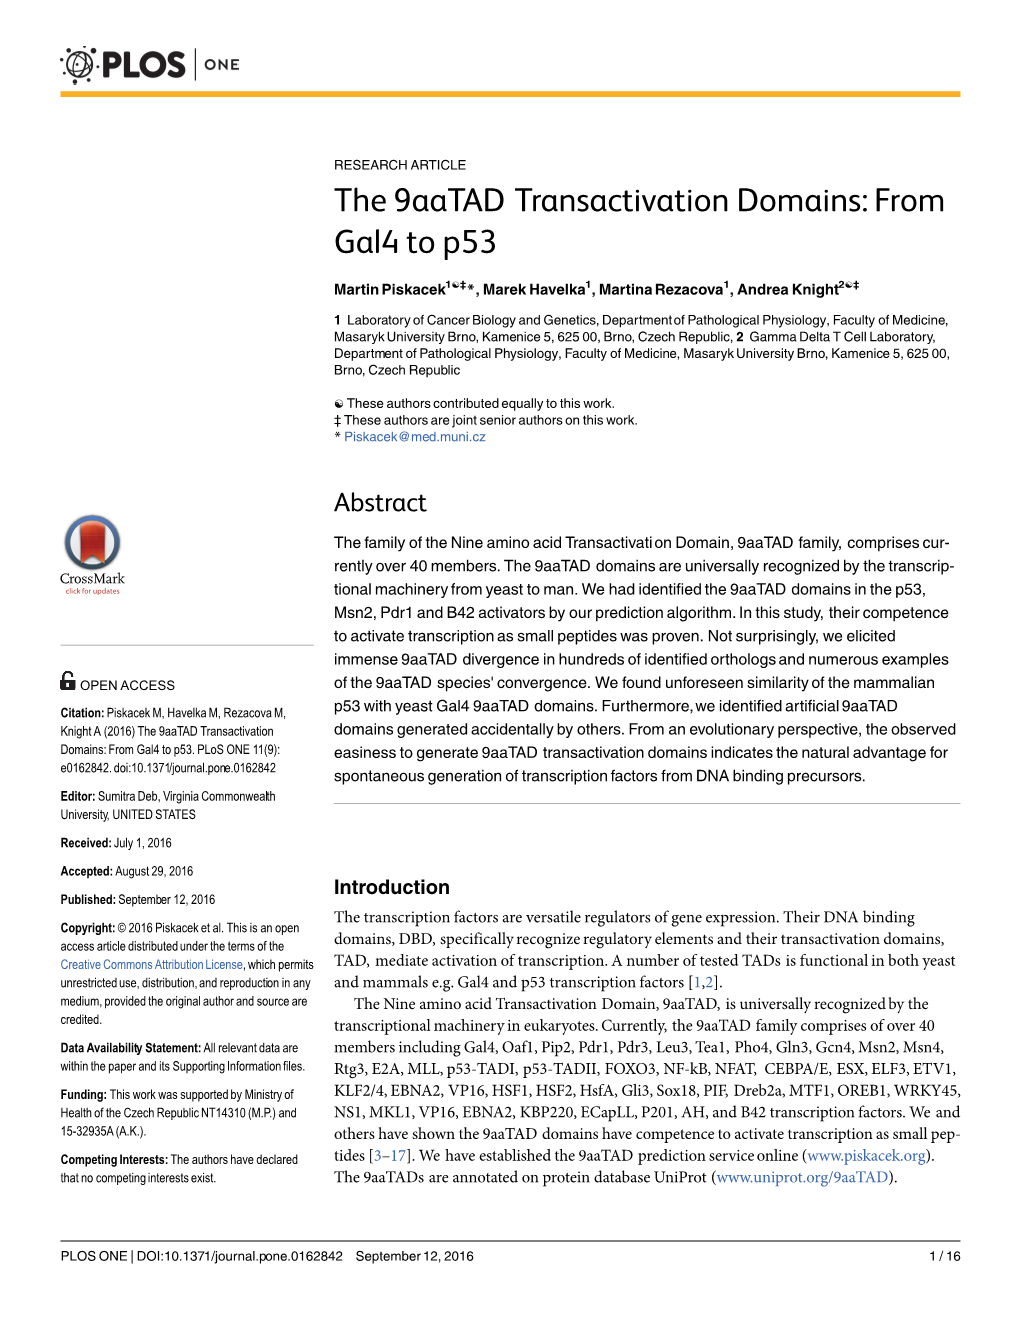 The 9Aatad Transactivation Domains: from Gal4 to P53